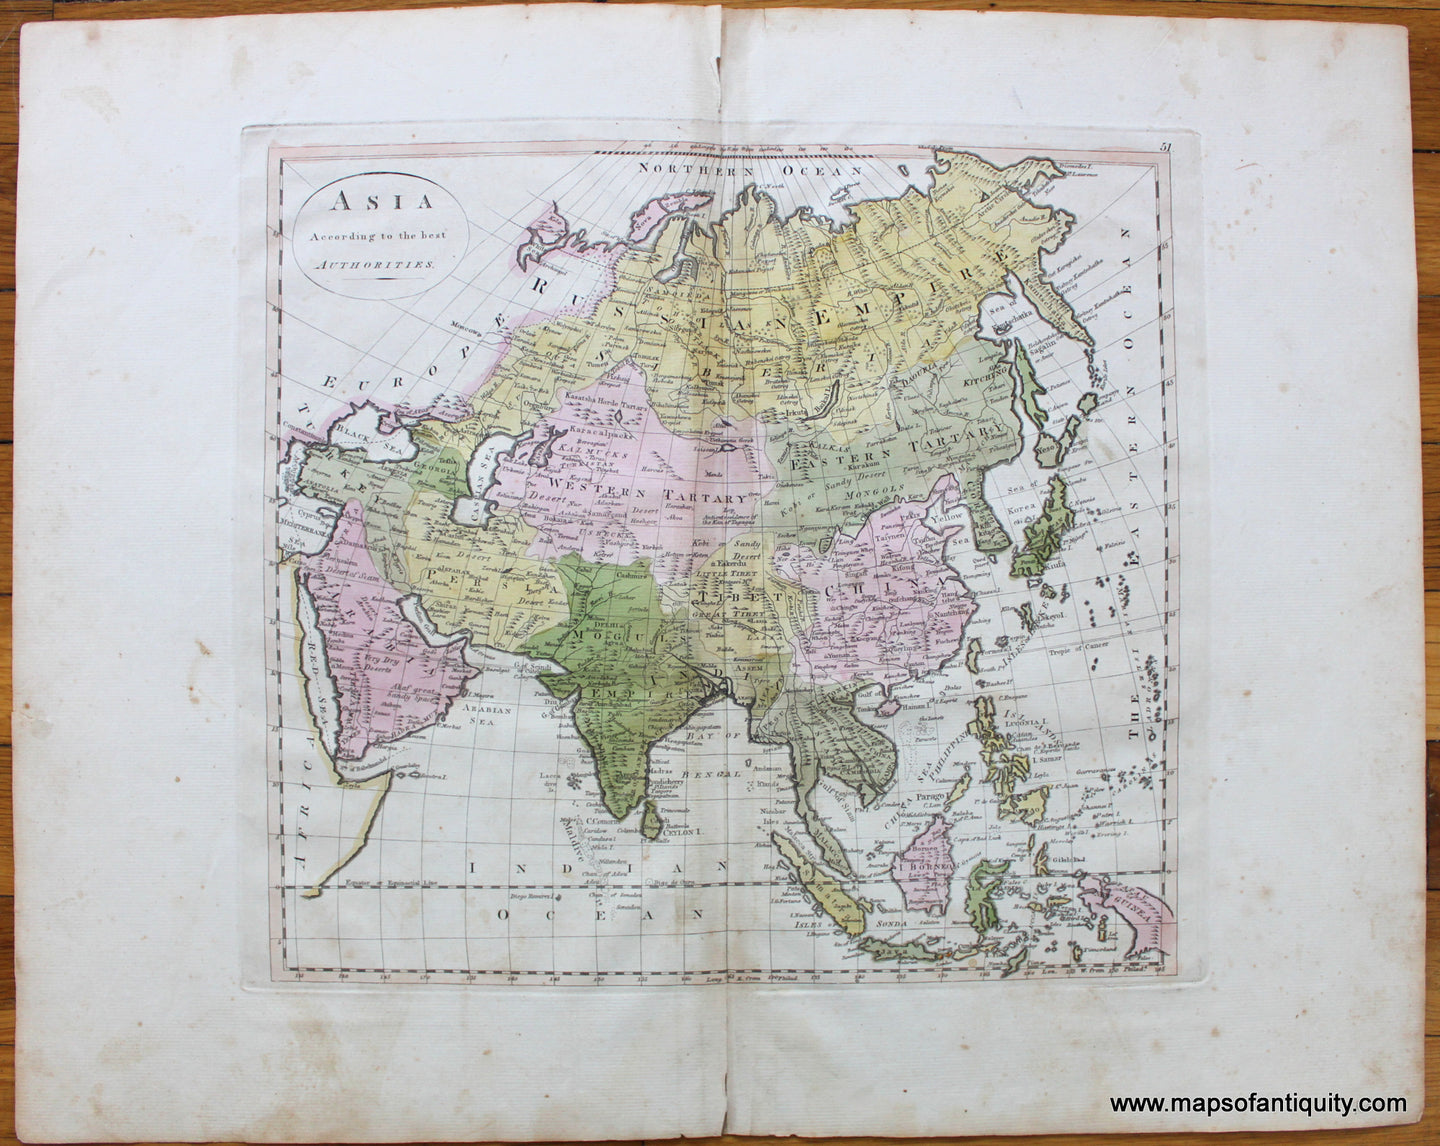 Antique-Hand-Colored-Map-Asia-According-to-the-Best-Authorities-Asia-Asia-General-1814-Carey-Maps-Of-Antiquity